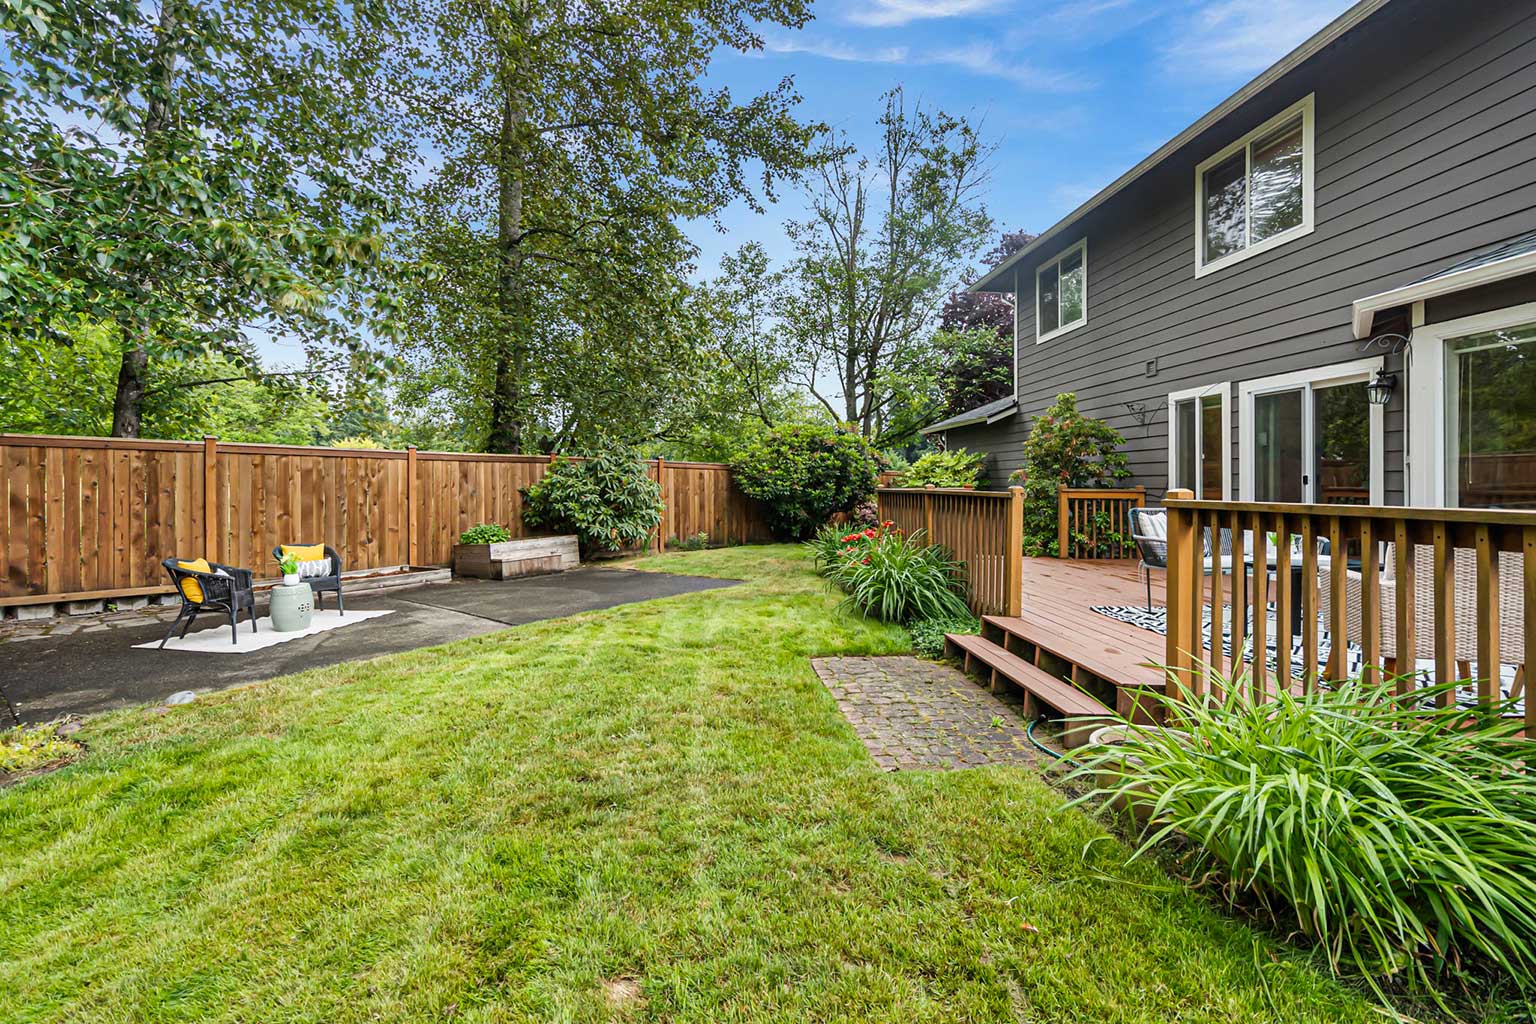 Fully fenced back yard with mature landscaping and sprinkler system